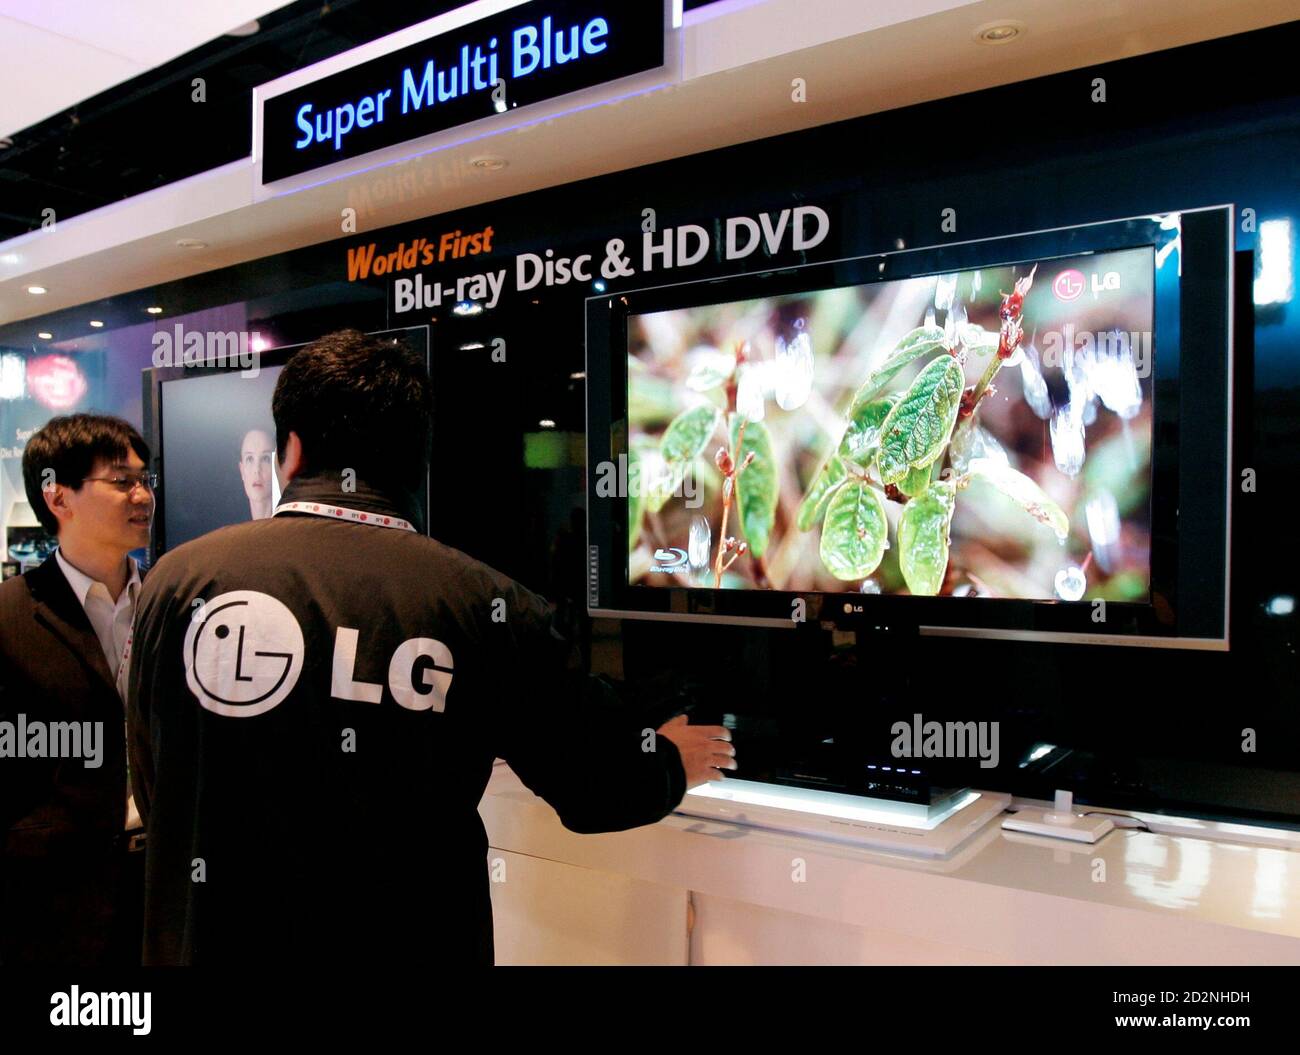 LG employees look at the new LG Super Multi Blue player at the LG booth  before the 2007 International Consumer Electronics Show (CES) in Las Vegas,  Nevada January 7, 2007. The single